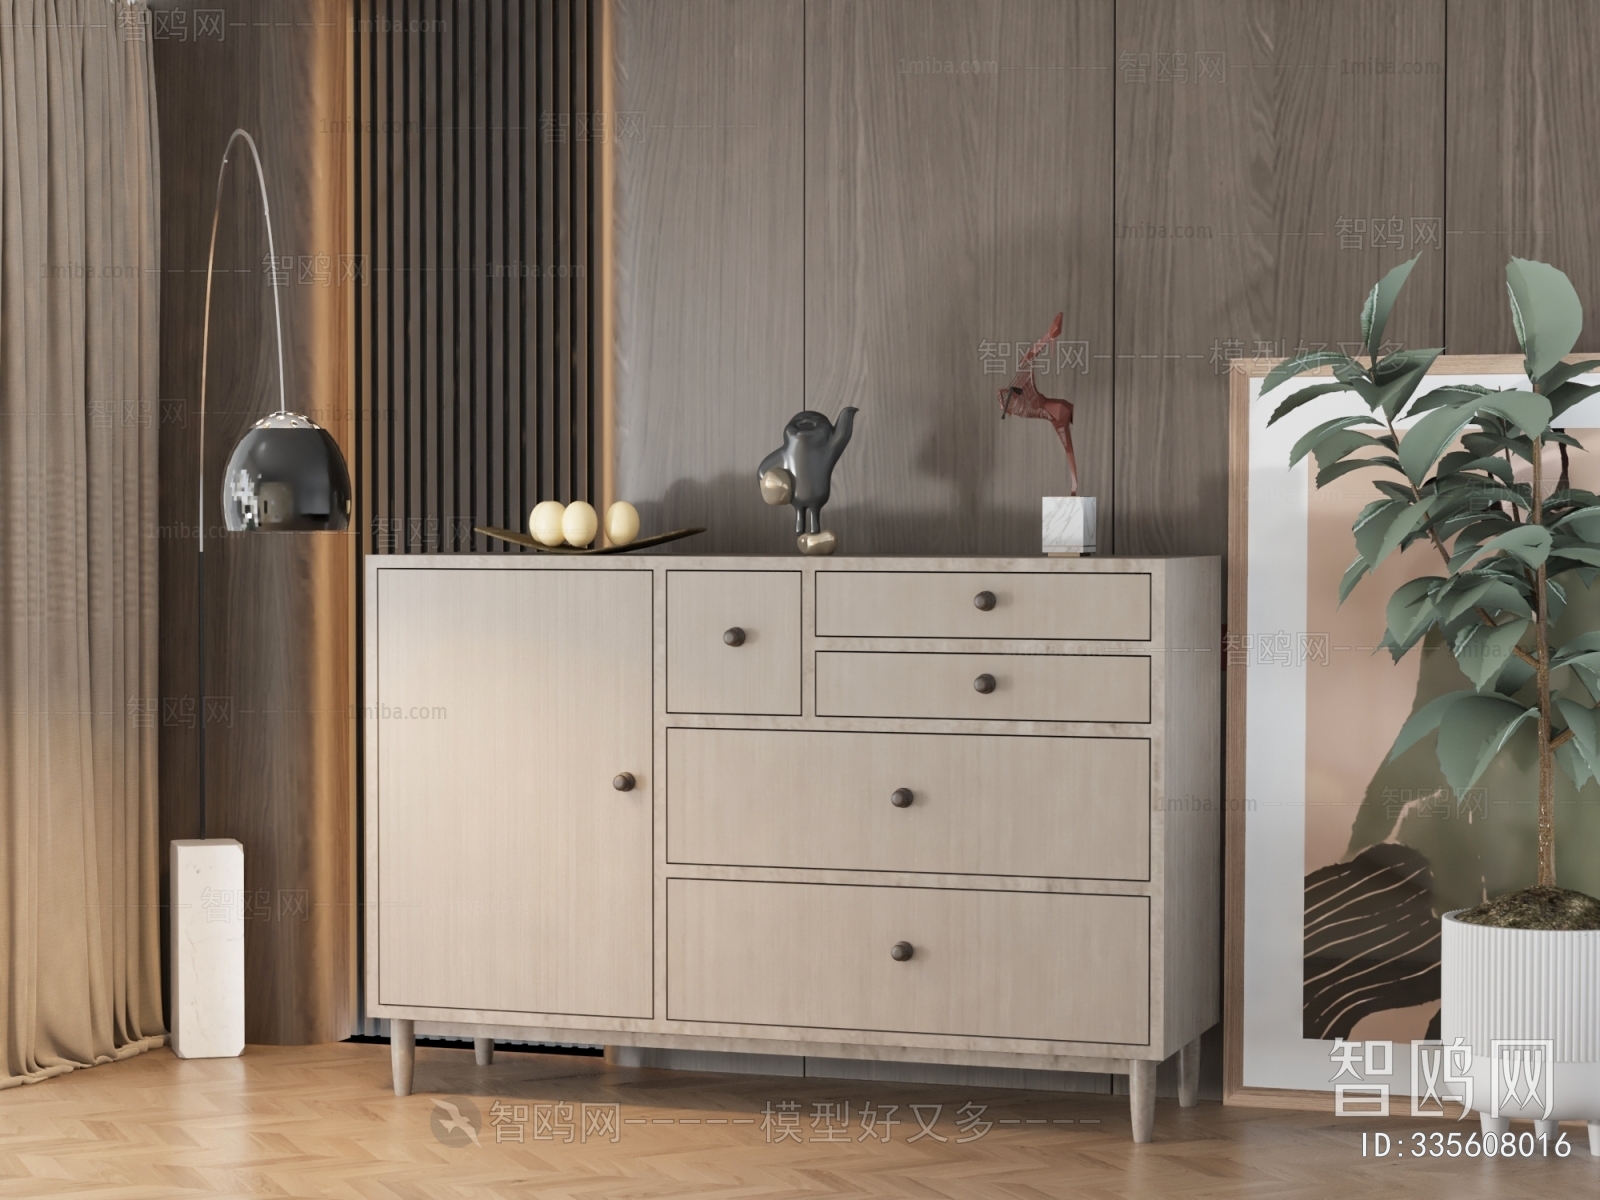 Modern Nordic Style Entrance Cabinet